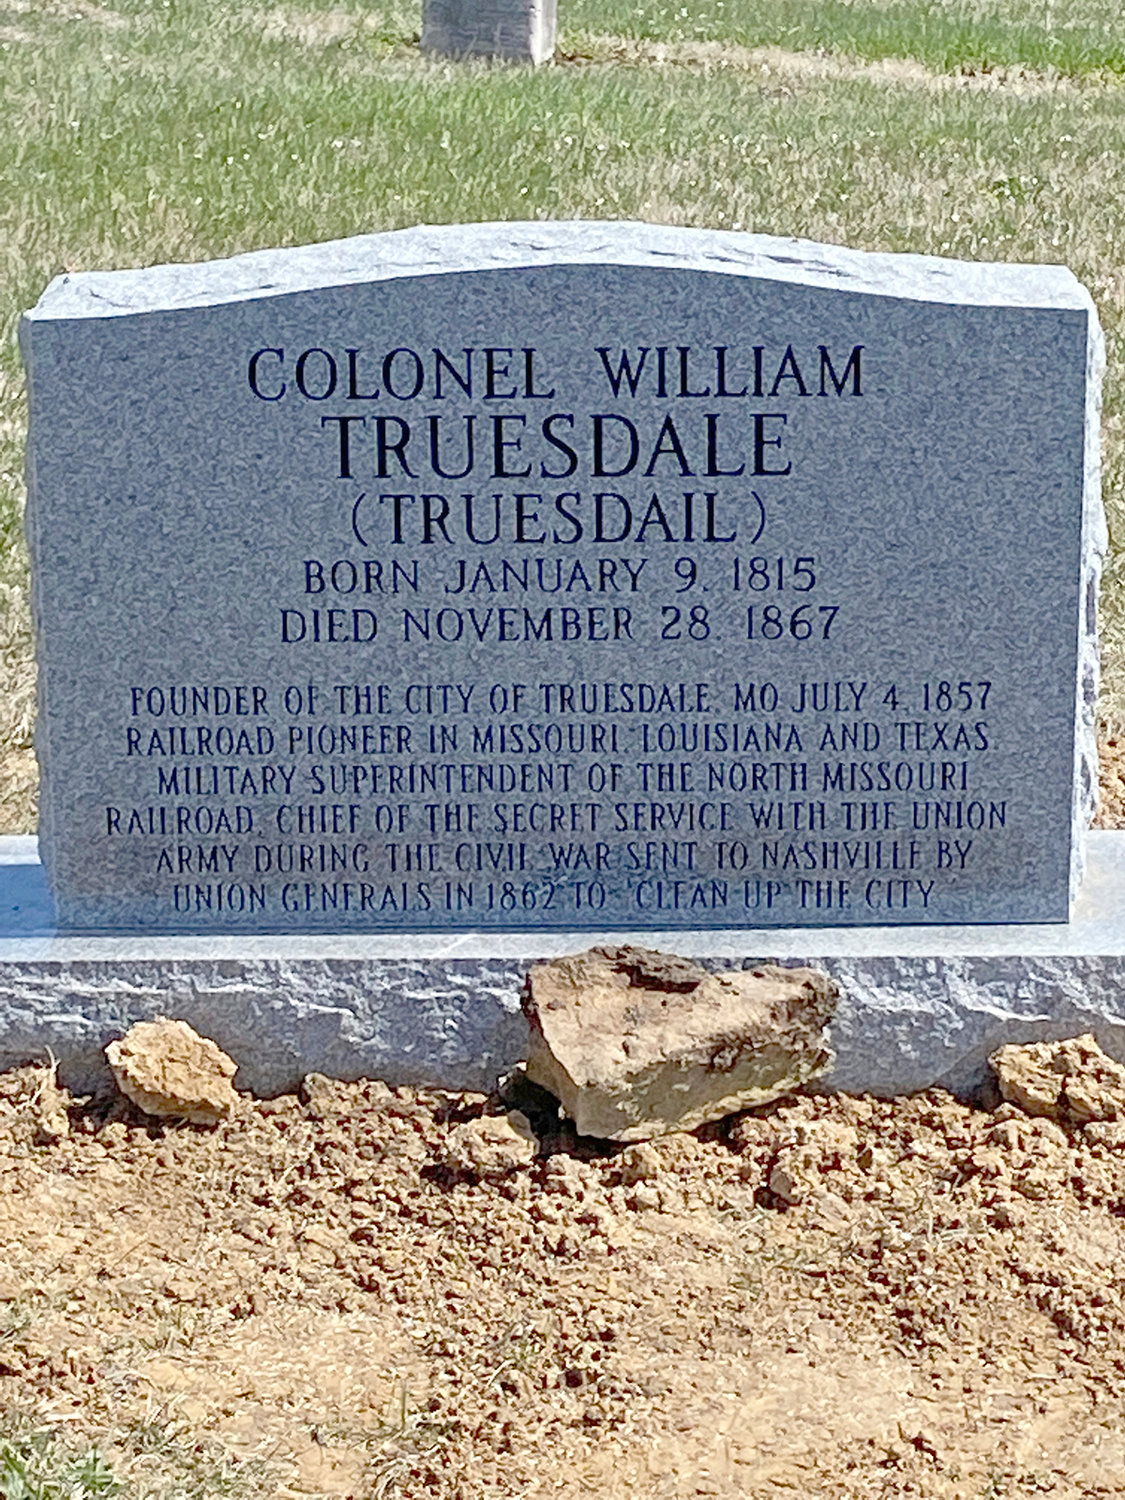 PRIDE IN HISTORY — Community members fundraised to purchase a gravestone for William Truesdail, who had no grave marker following the destruction of a 1948 tornado. The new marker notes the founding of the city of Truesdale, along with the founder’s railroad pioneer work and service during the Civil War.